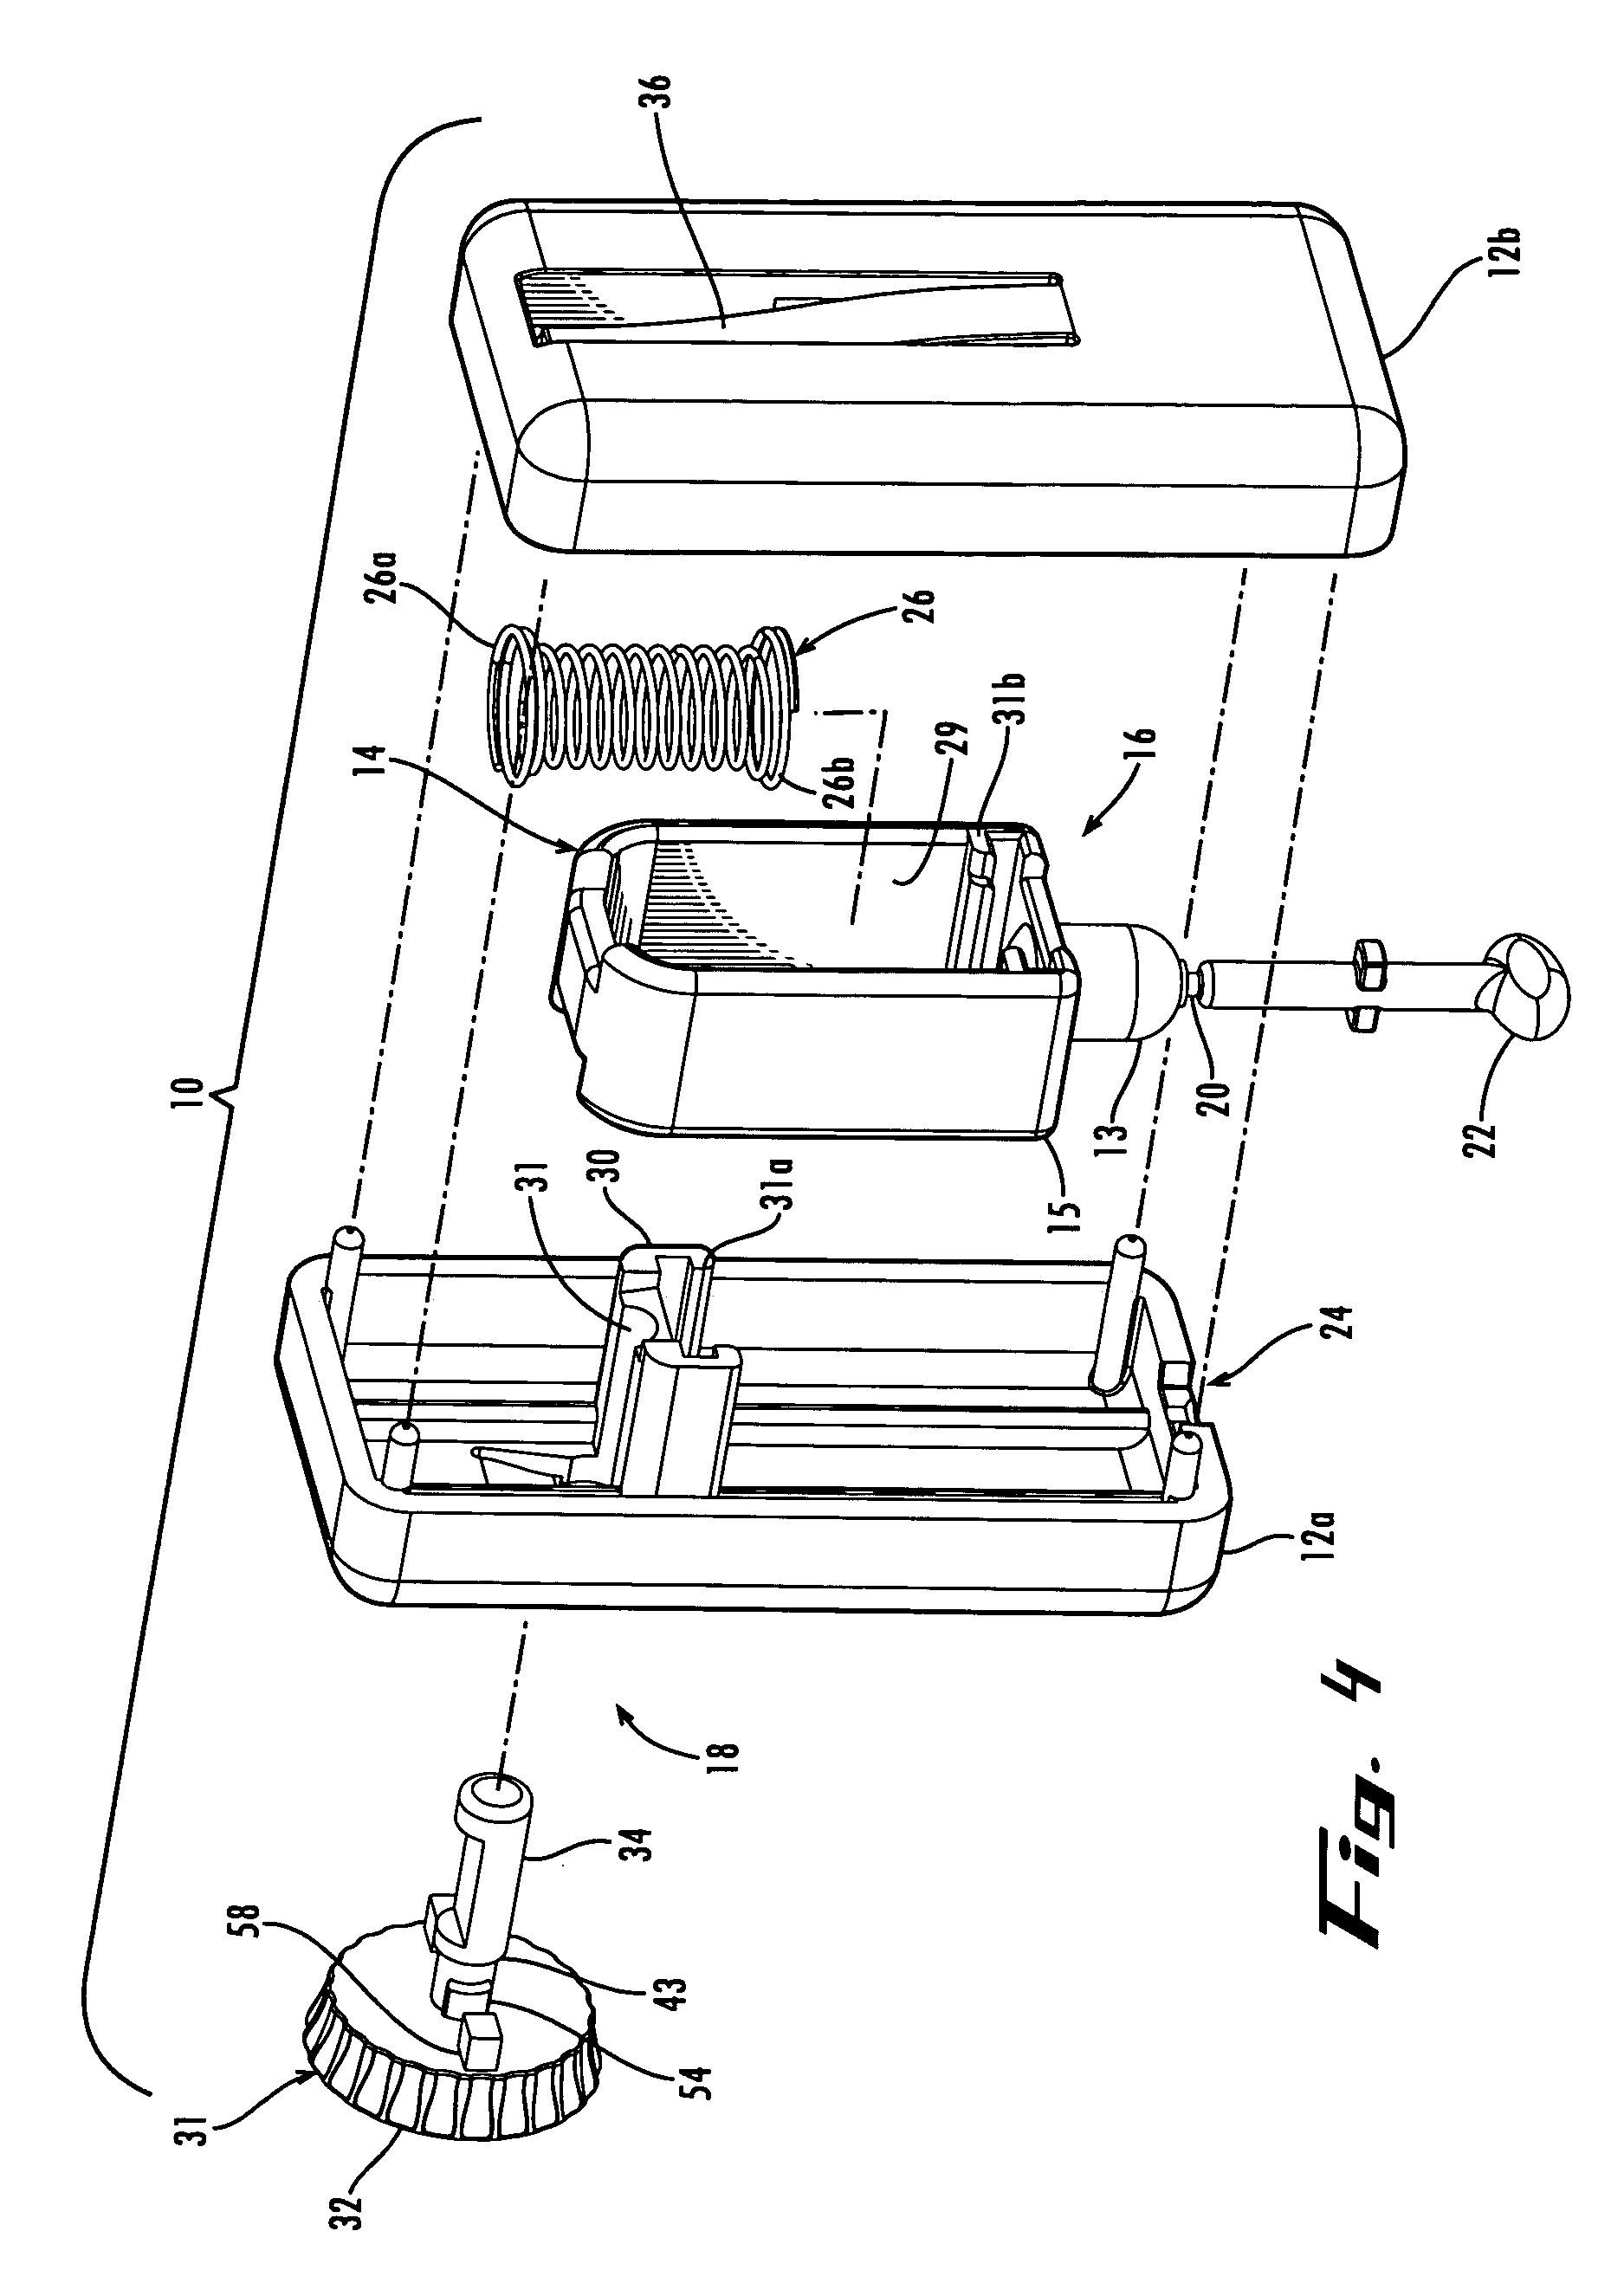 Lancing device with combination depth and activation control